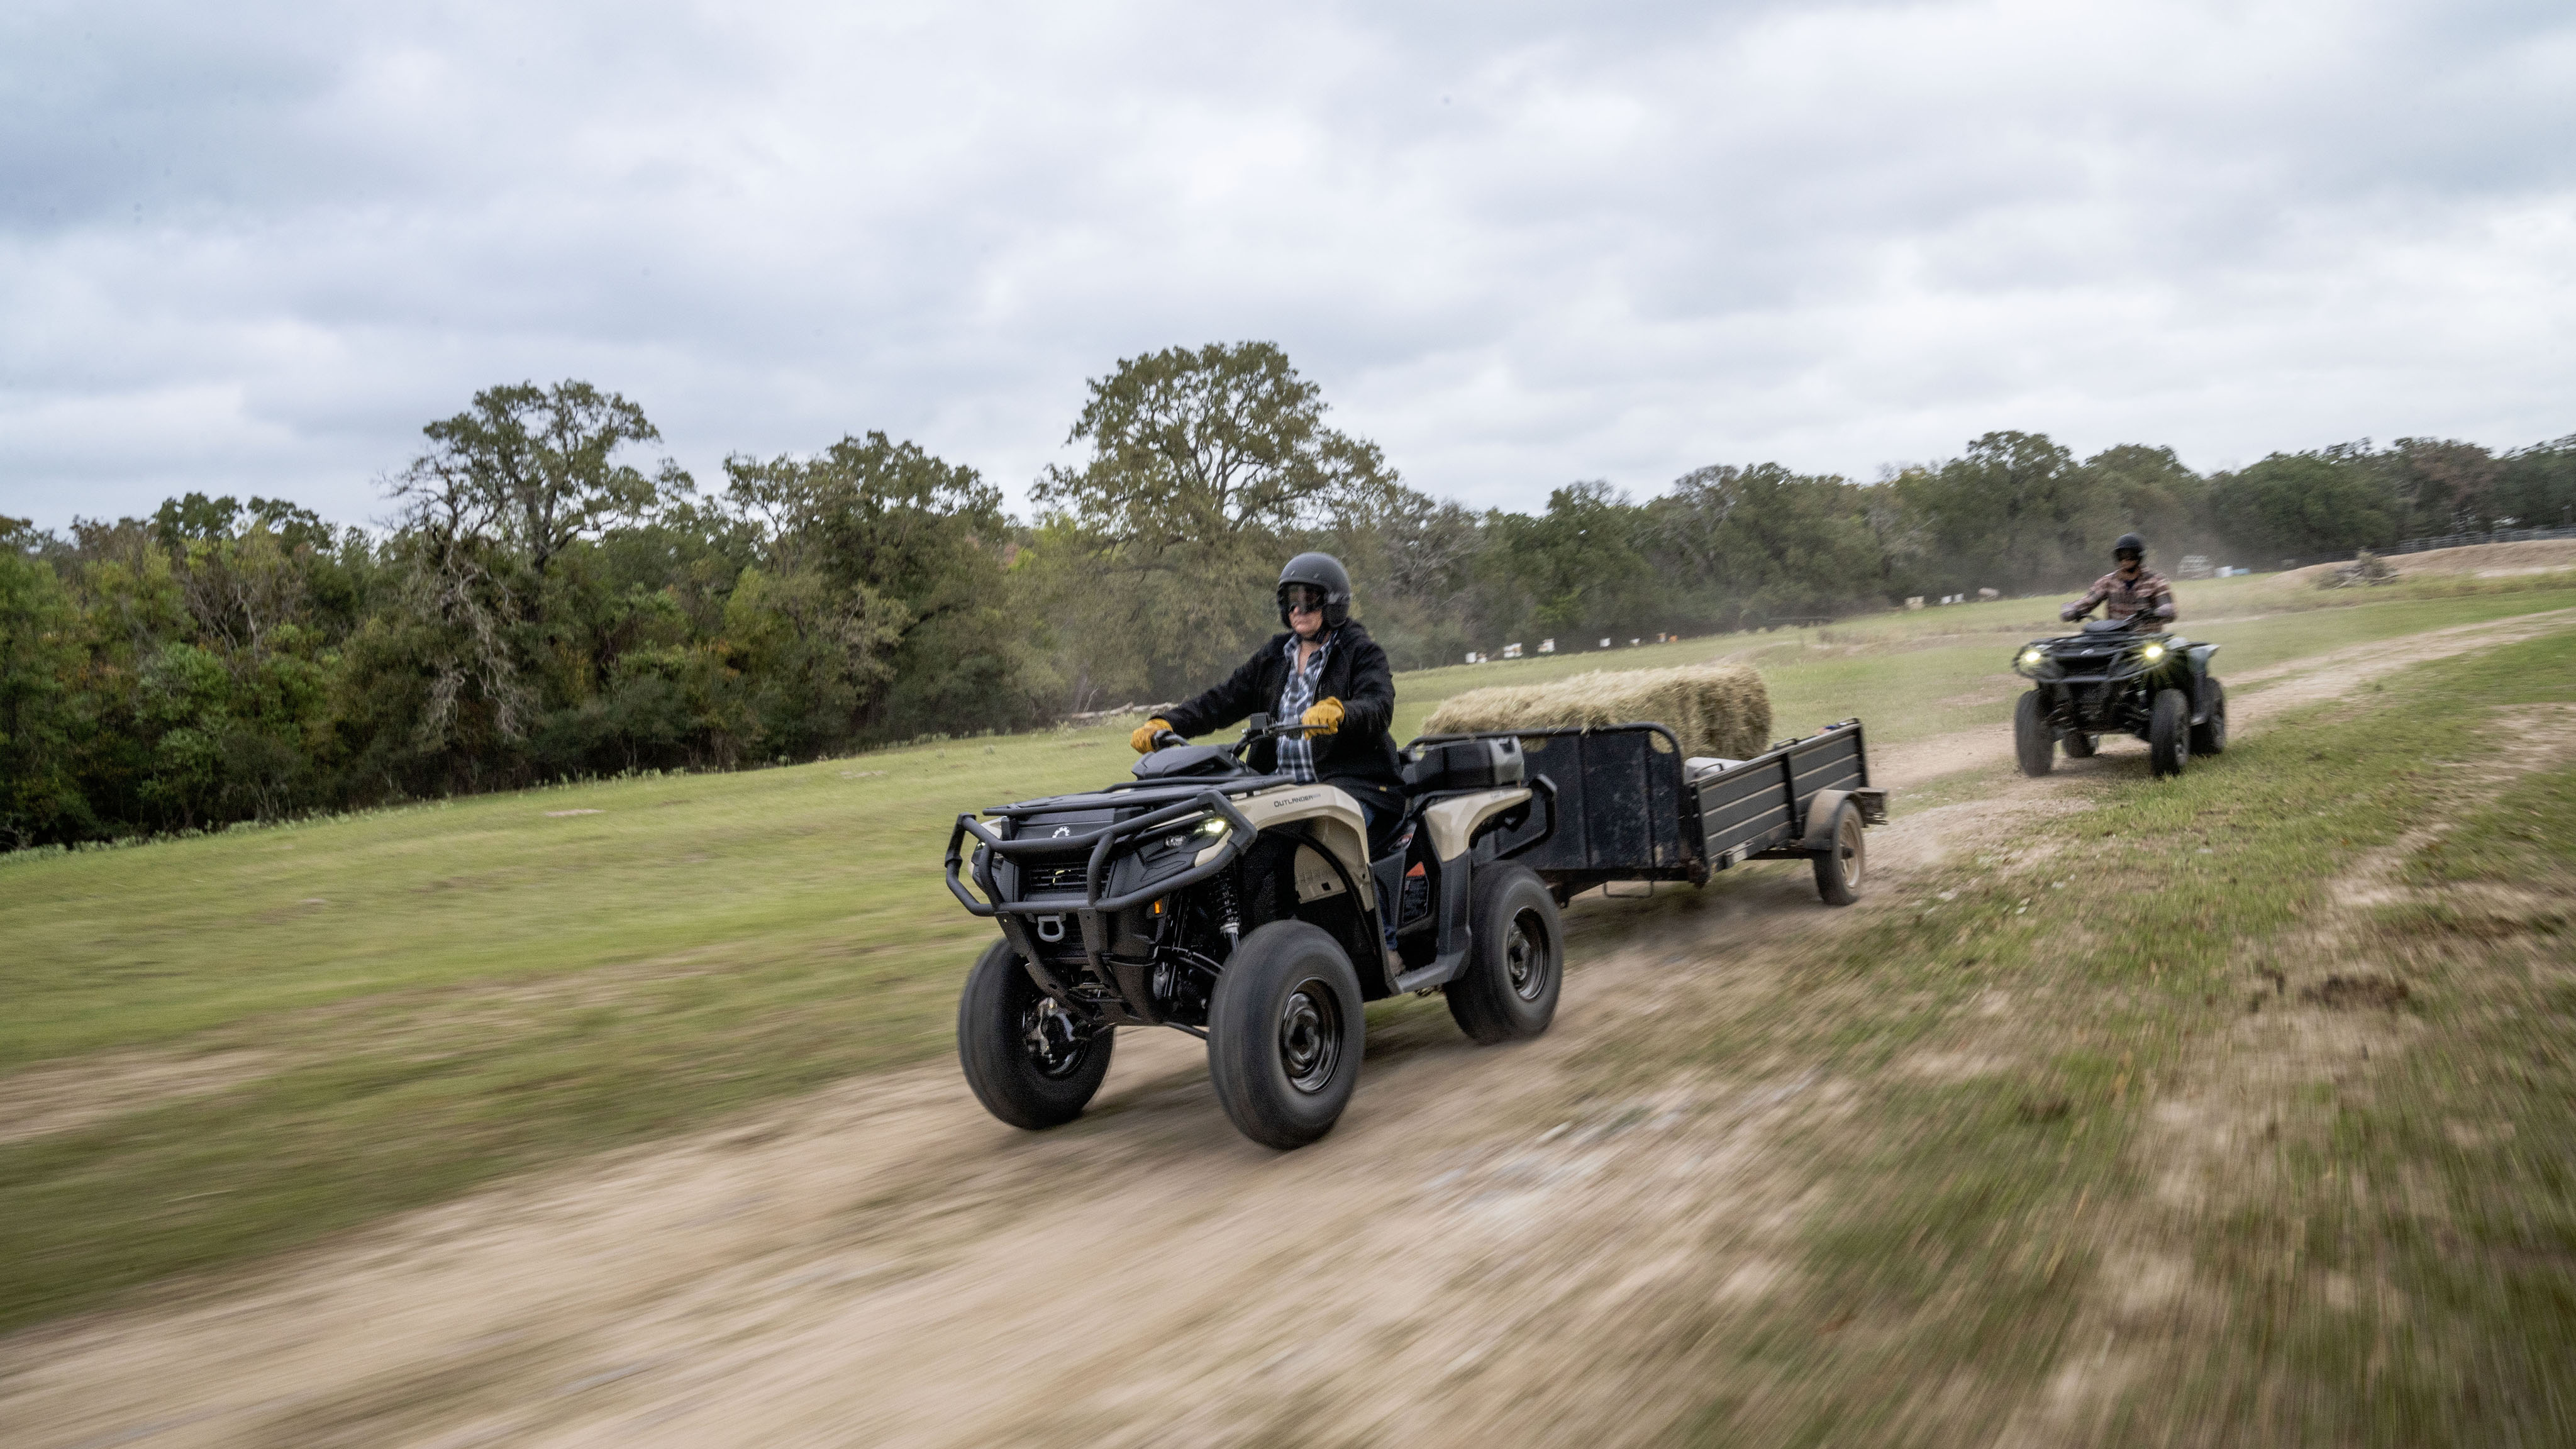 2 farmers riding on their Can-Am Outlander Pro